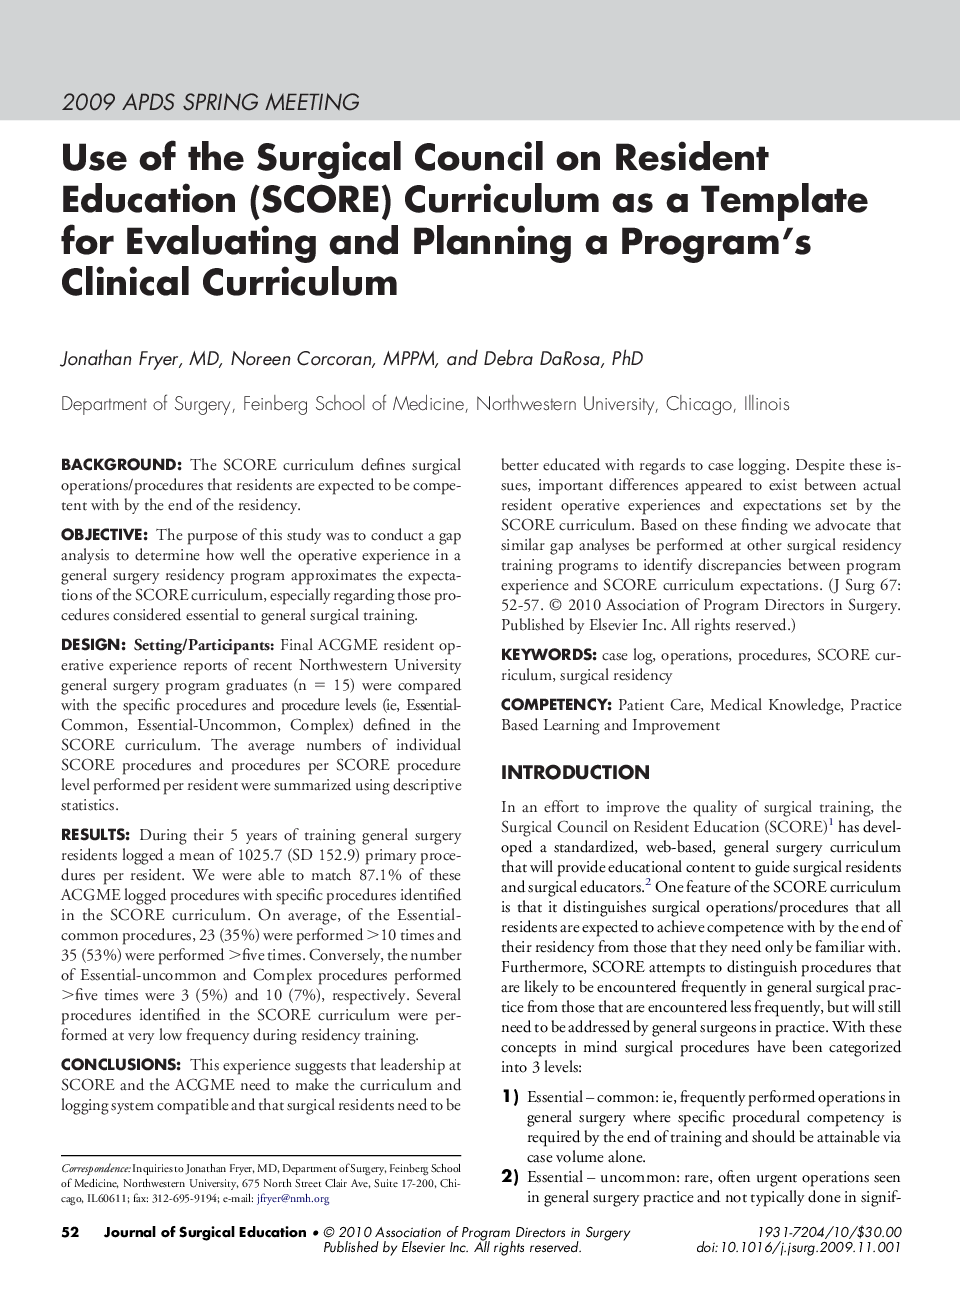 Use of the Surgical Council on Resident Education (SCORE) Curriculum as a Template for Evaluating and Planning a Program's Clinical Curriculum